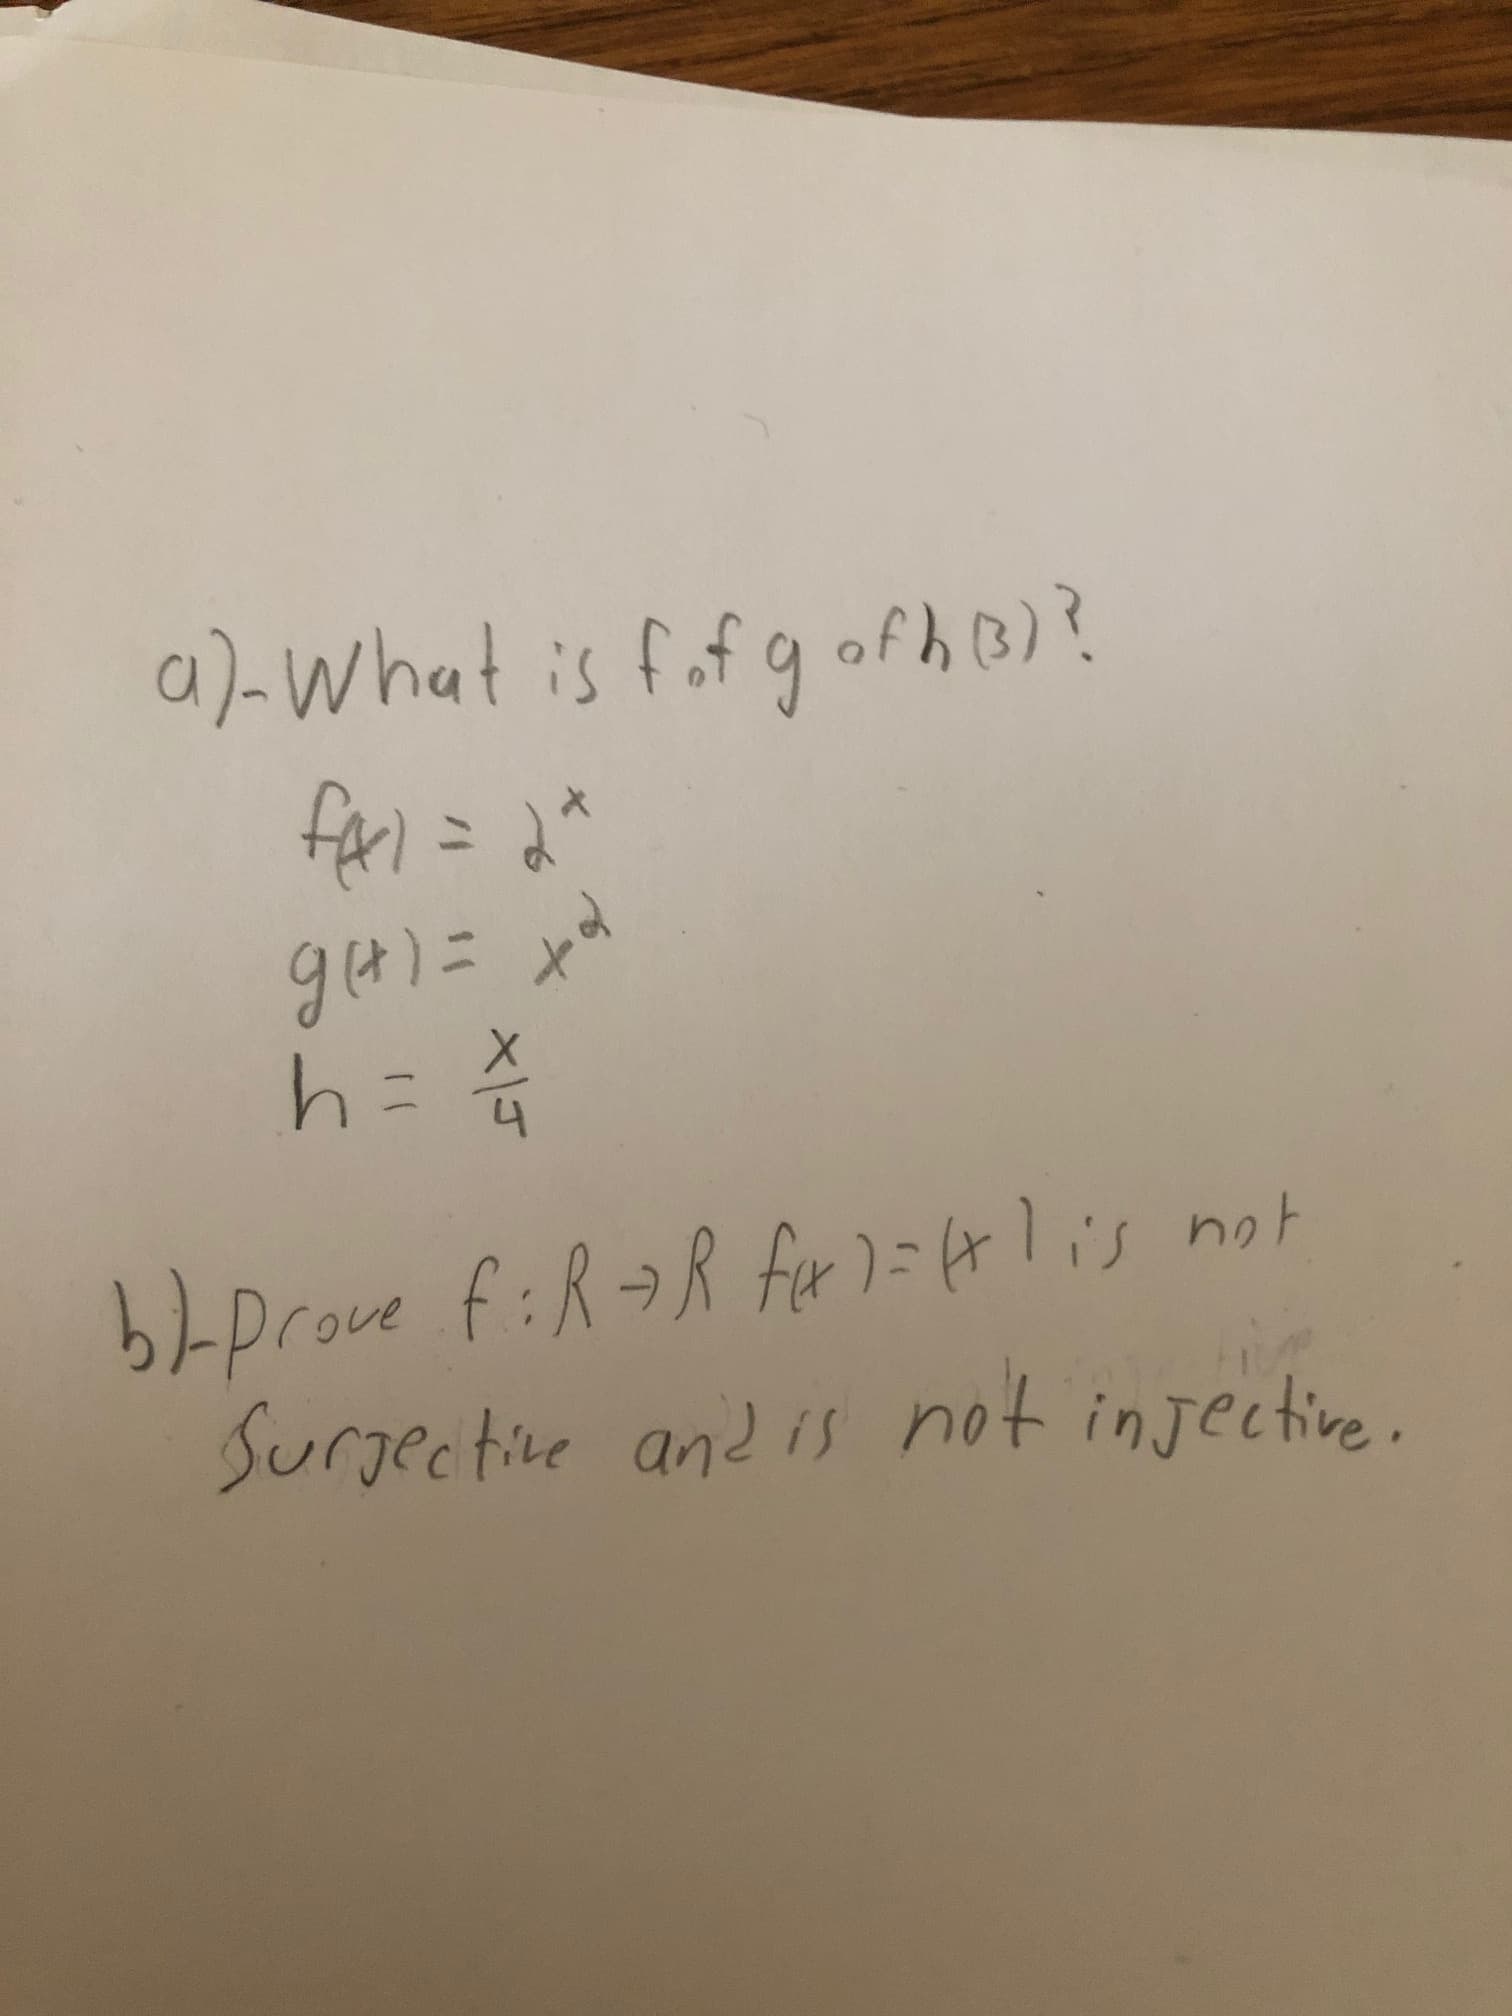 a)-What is fof g ofh 3)?
fari=
gal=
bprove f:R¬R fer )=4lis not
Surgective and is not injective.
